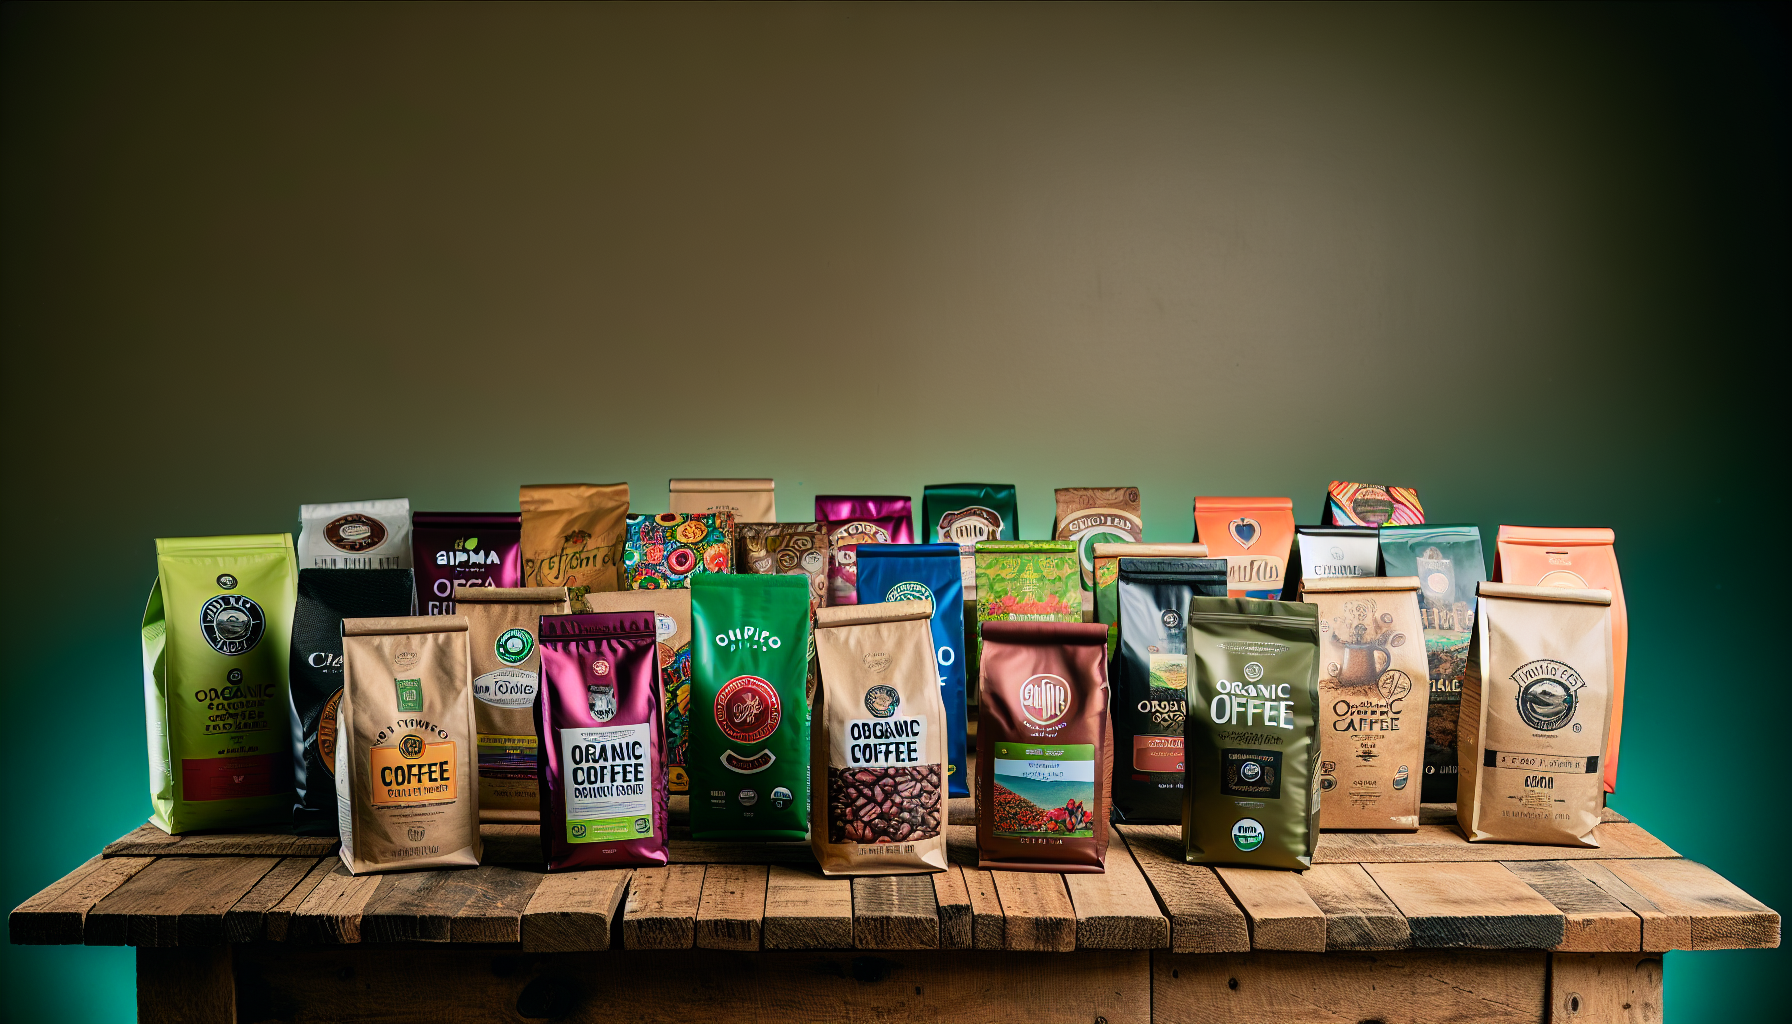 A collection of different organic coffee brands